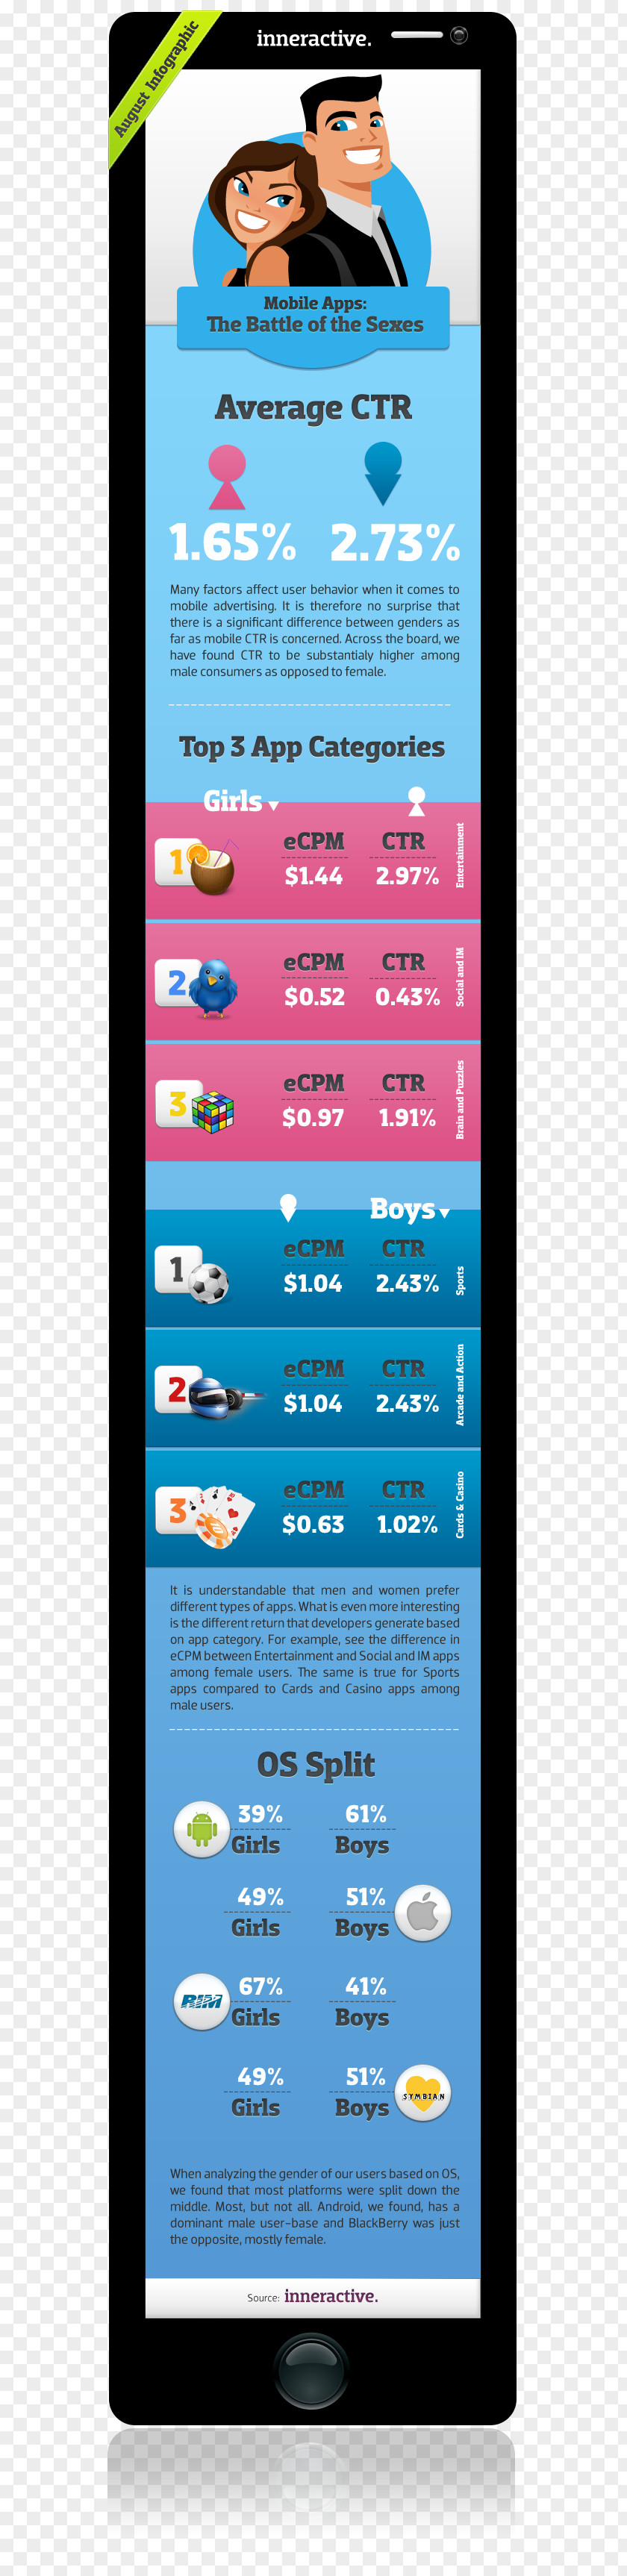 Woman Infographic Mobile Advertising PNG